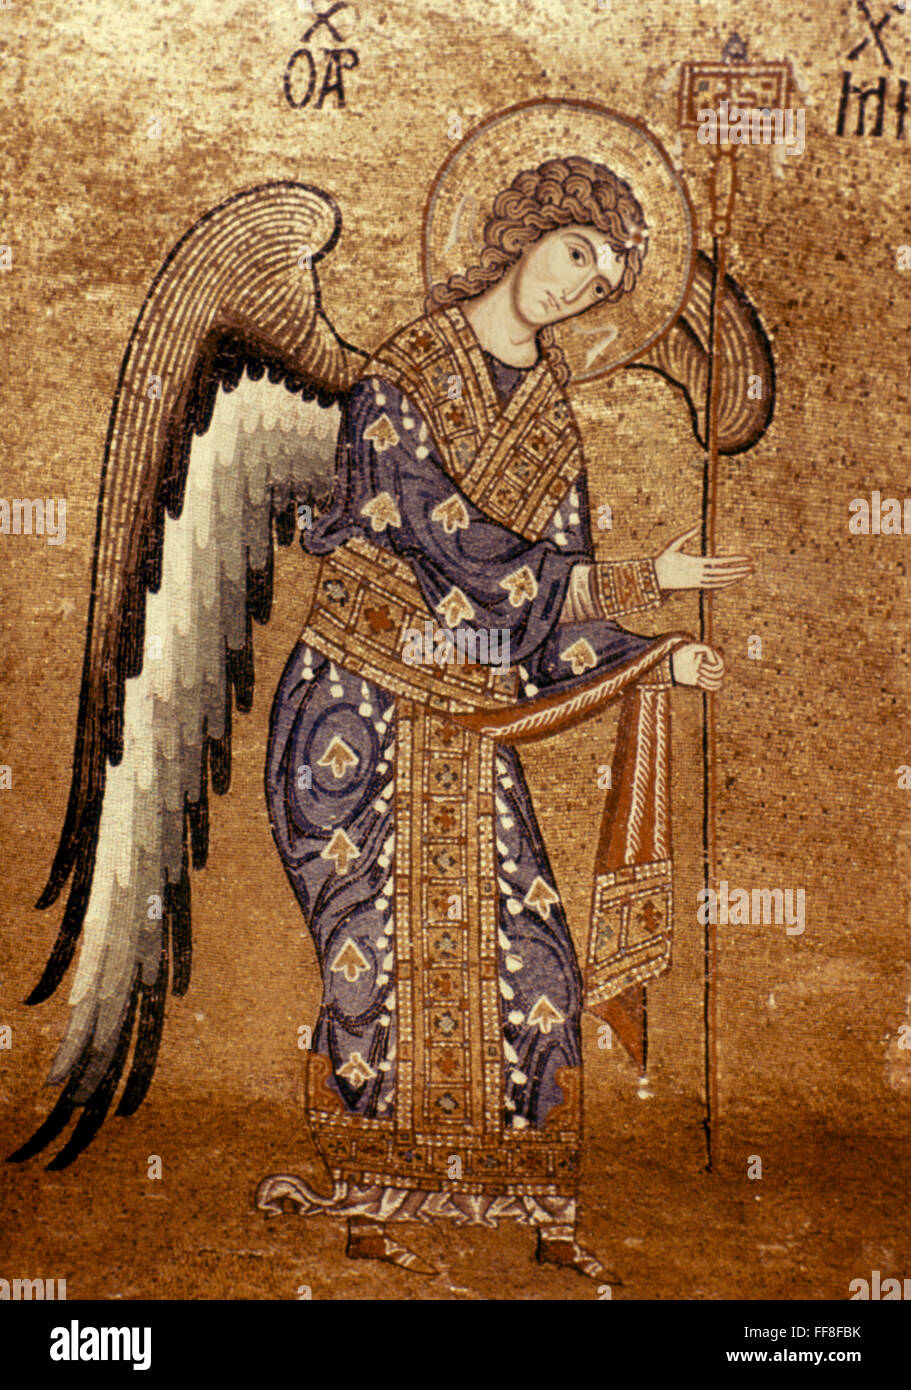 ARCHANGEL. /nMosaic, 13th century, from Palermo, Italy. Stock Photo